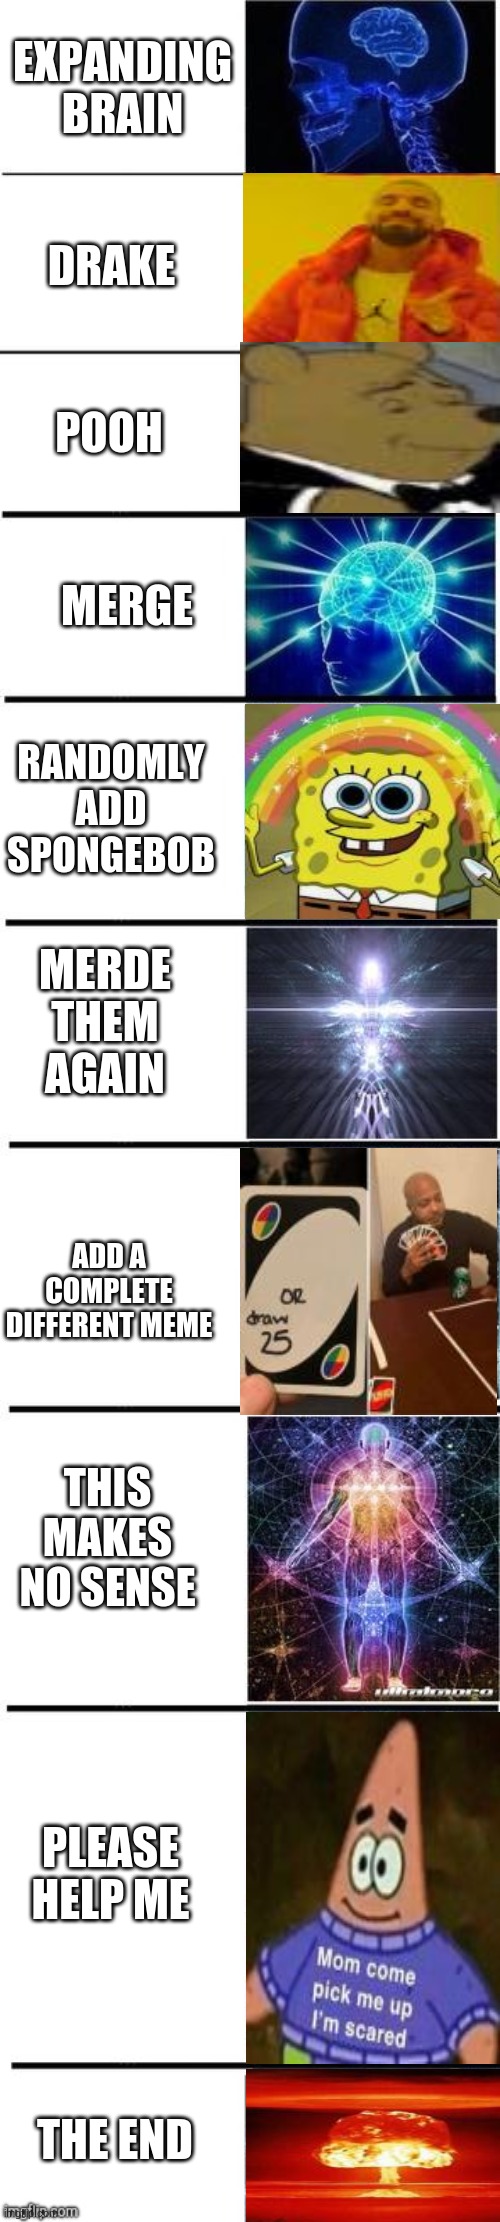 probably the longest expanding brain... | EXPANDING BRAIN; DRAKE; POOH; MERGE; RANDOMLY ADD SPONGEBOB; MERDE THEM AGAIN; ADD A COMPLETE DIFFERENT MEME; THIS MAKES NO SENSE; PLEASE HELP ME; THE END | image tagged in meme mash up | made w/ Imgflip meme maker